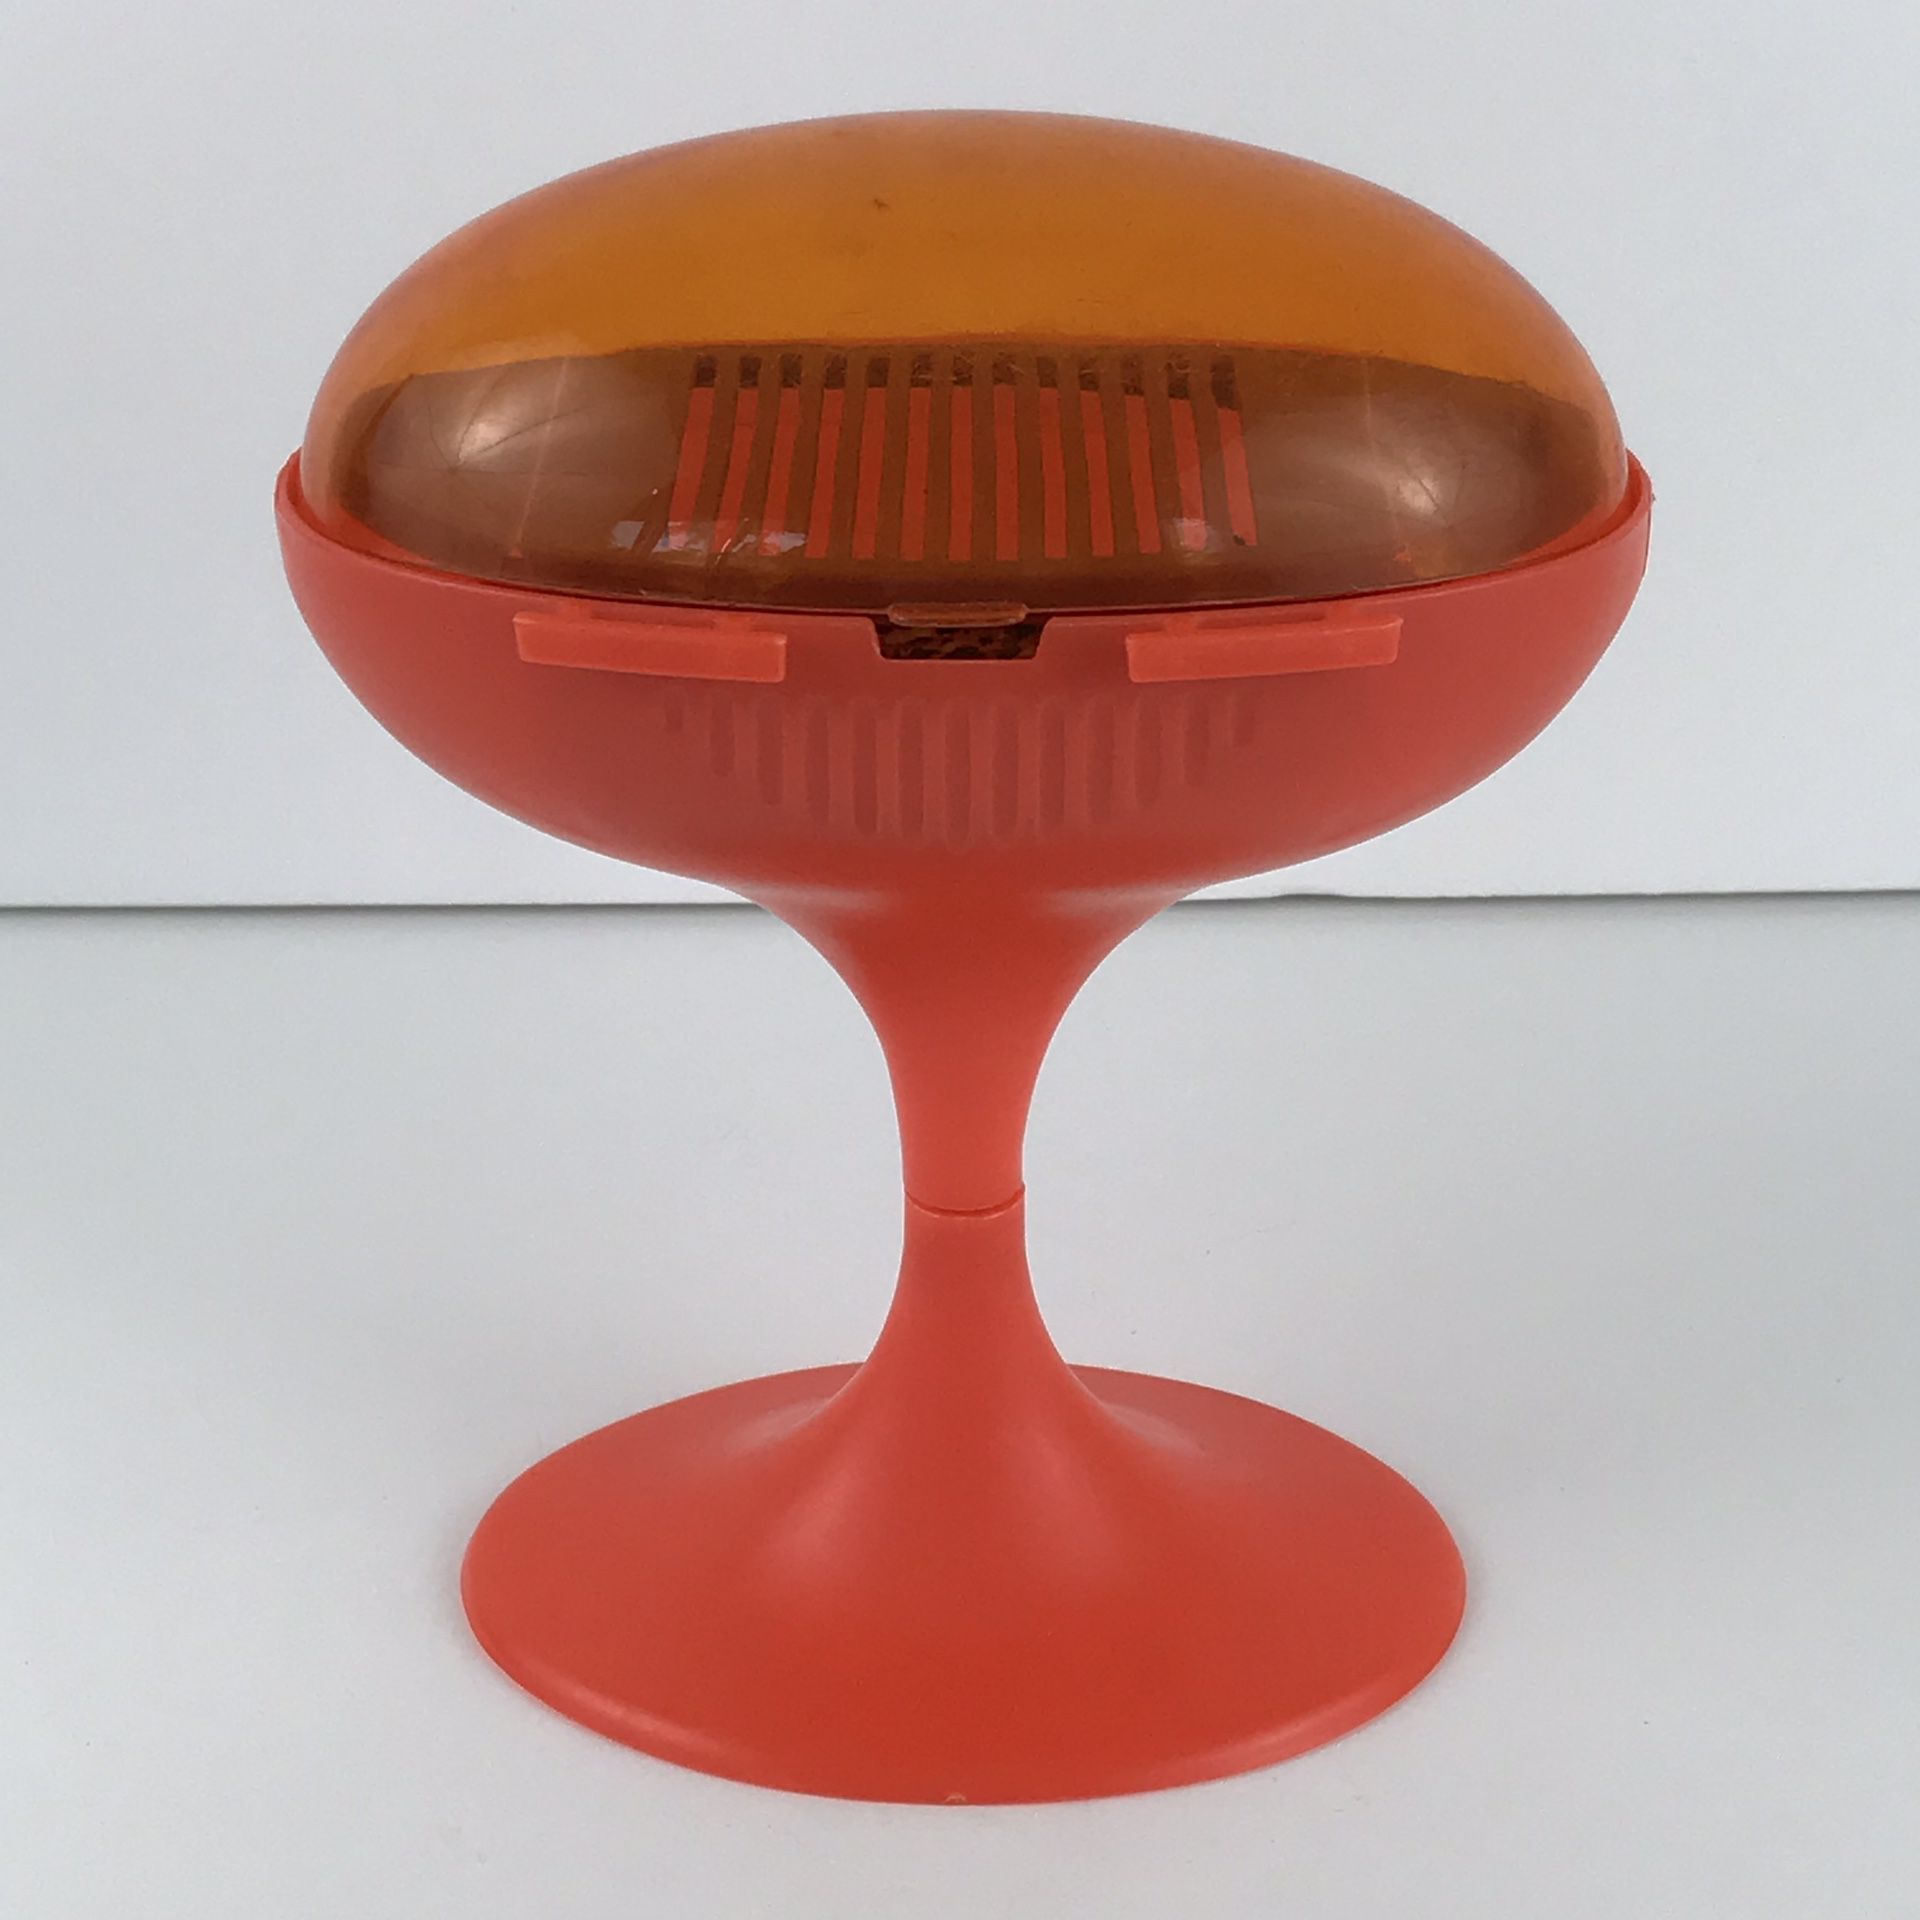 Barbie Barbecue Grill Orange 1980s? Outdoor Camping Picnic Cooking